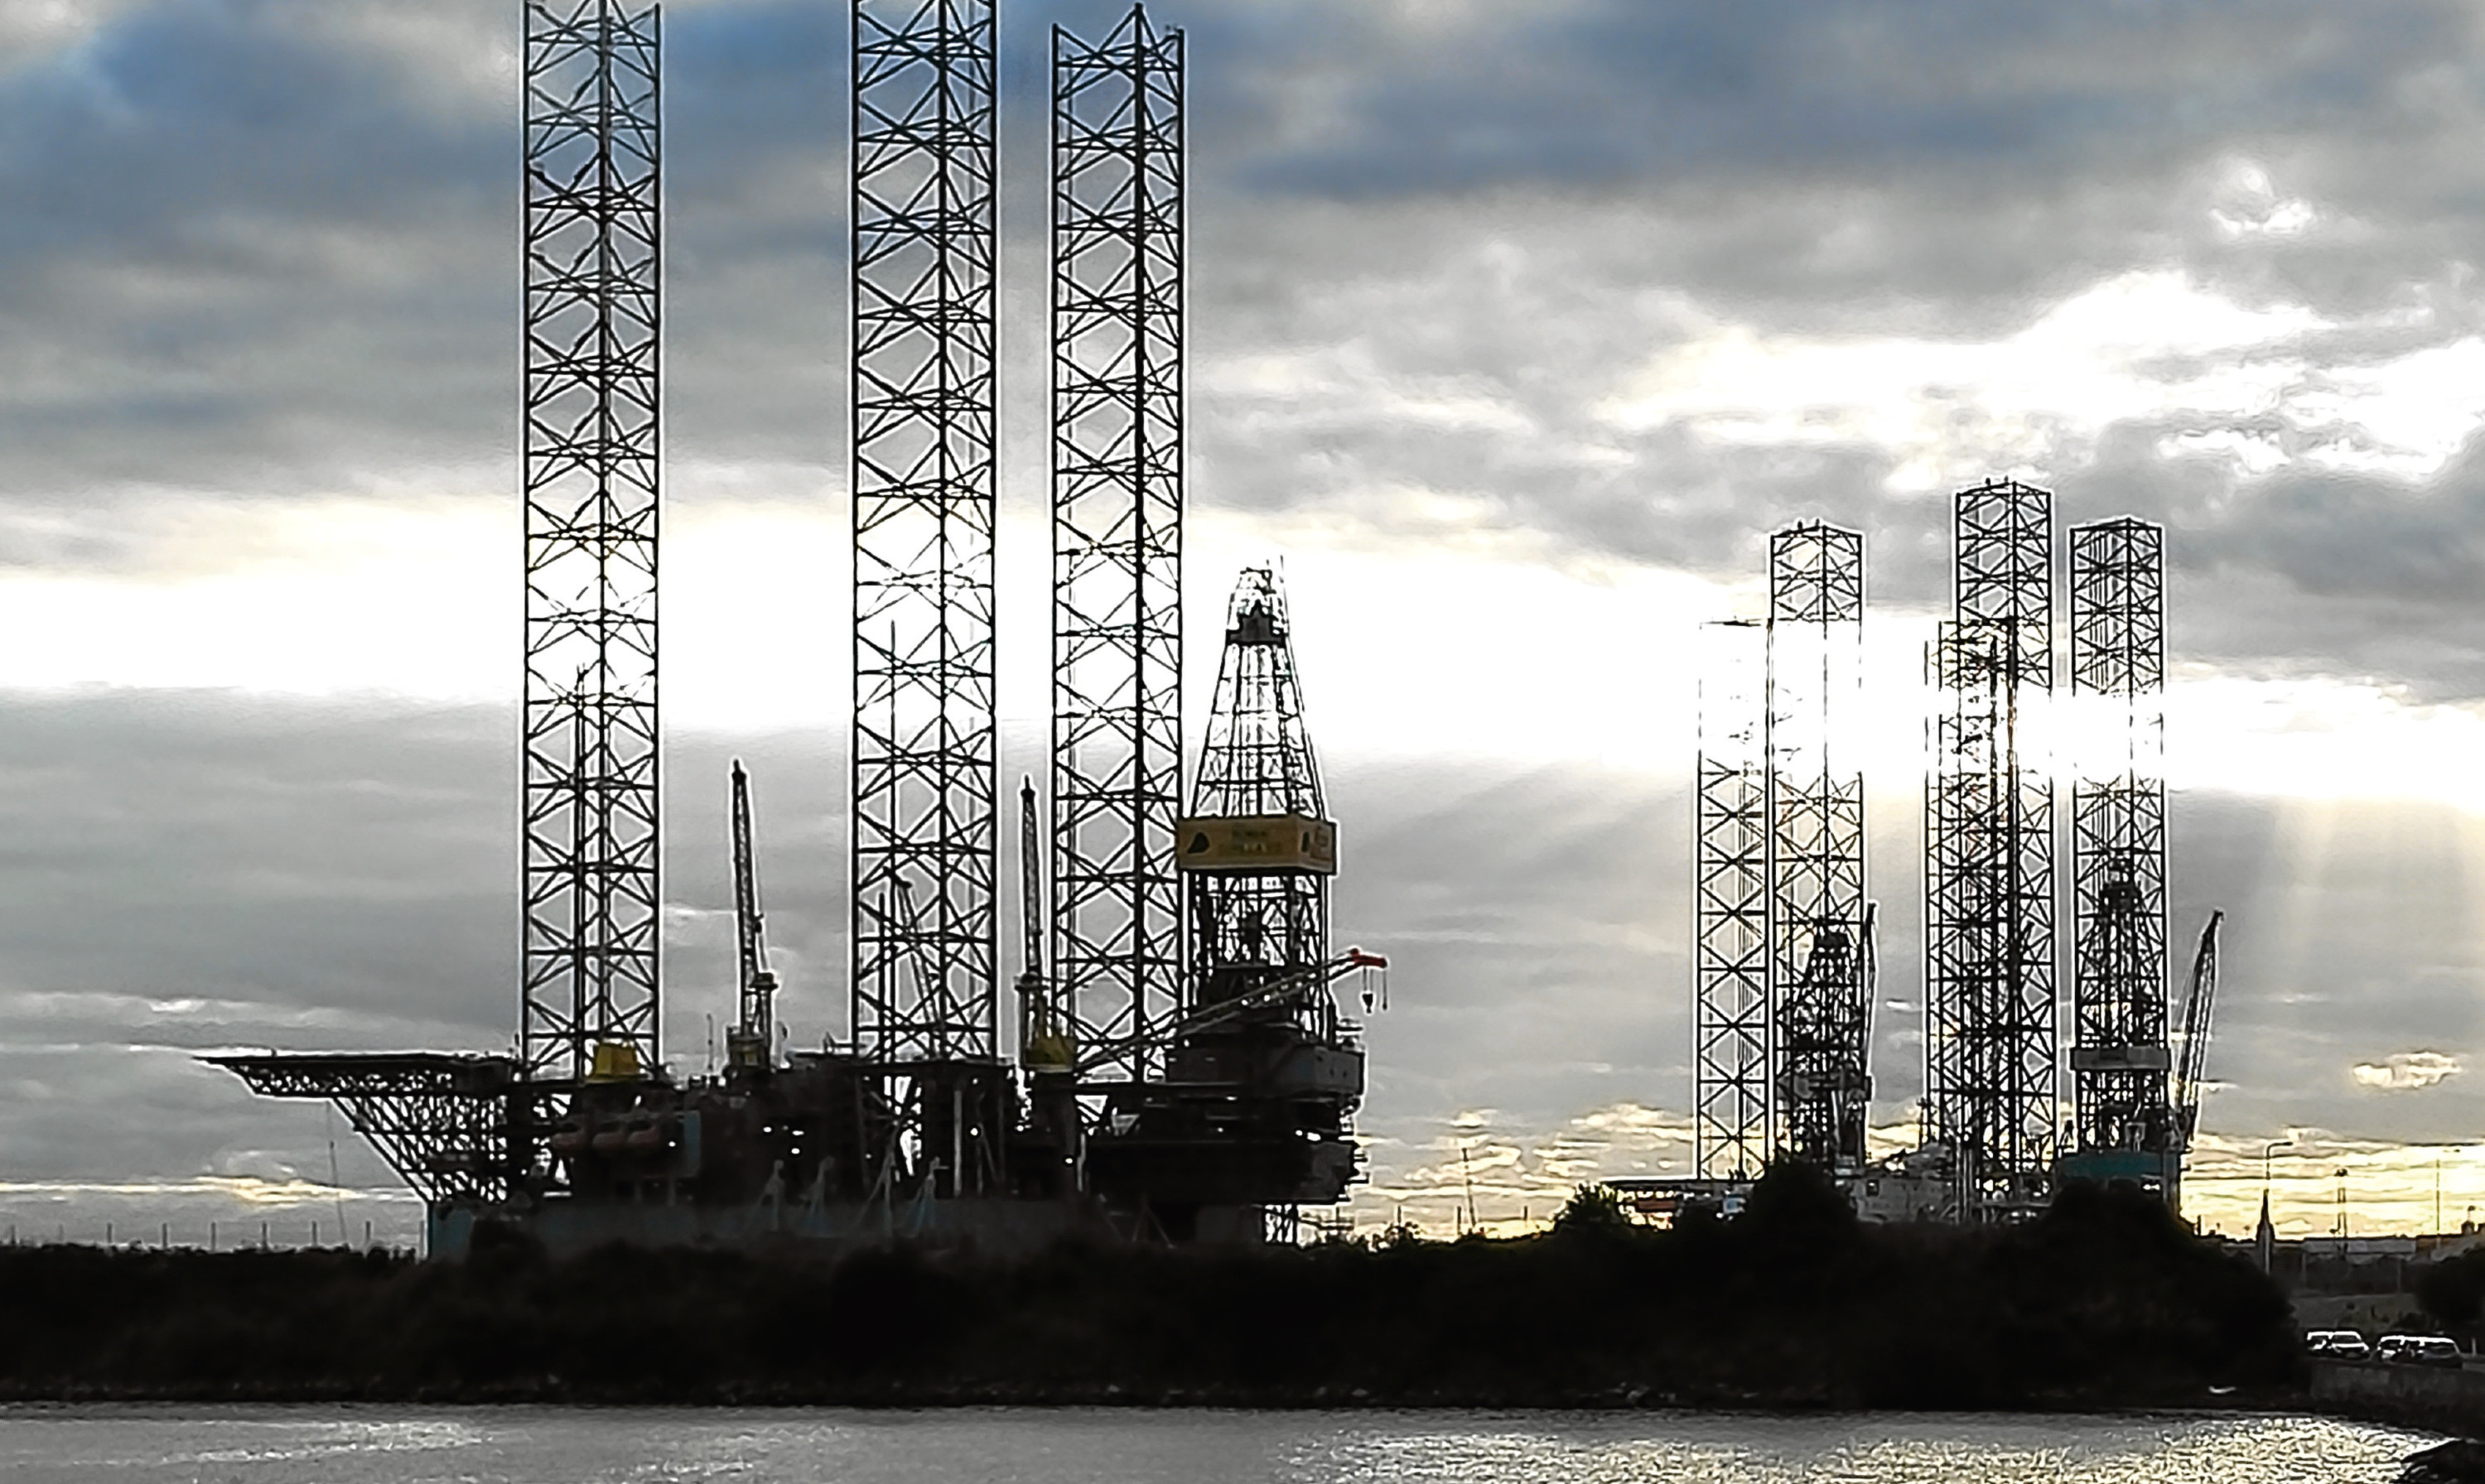 Oil rigs stacked at the Port of Dundee